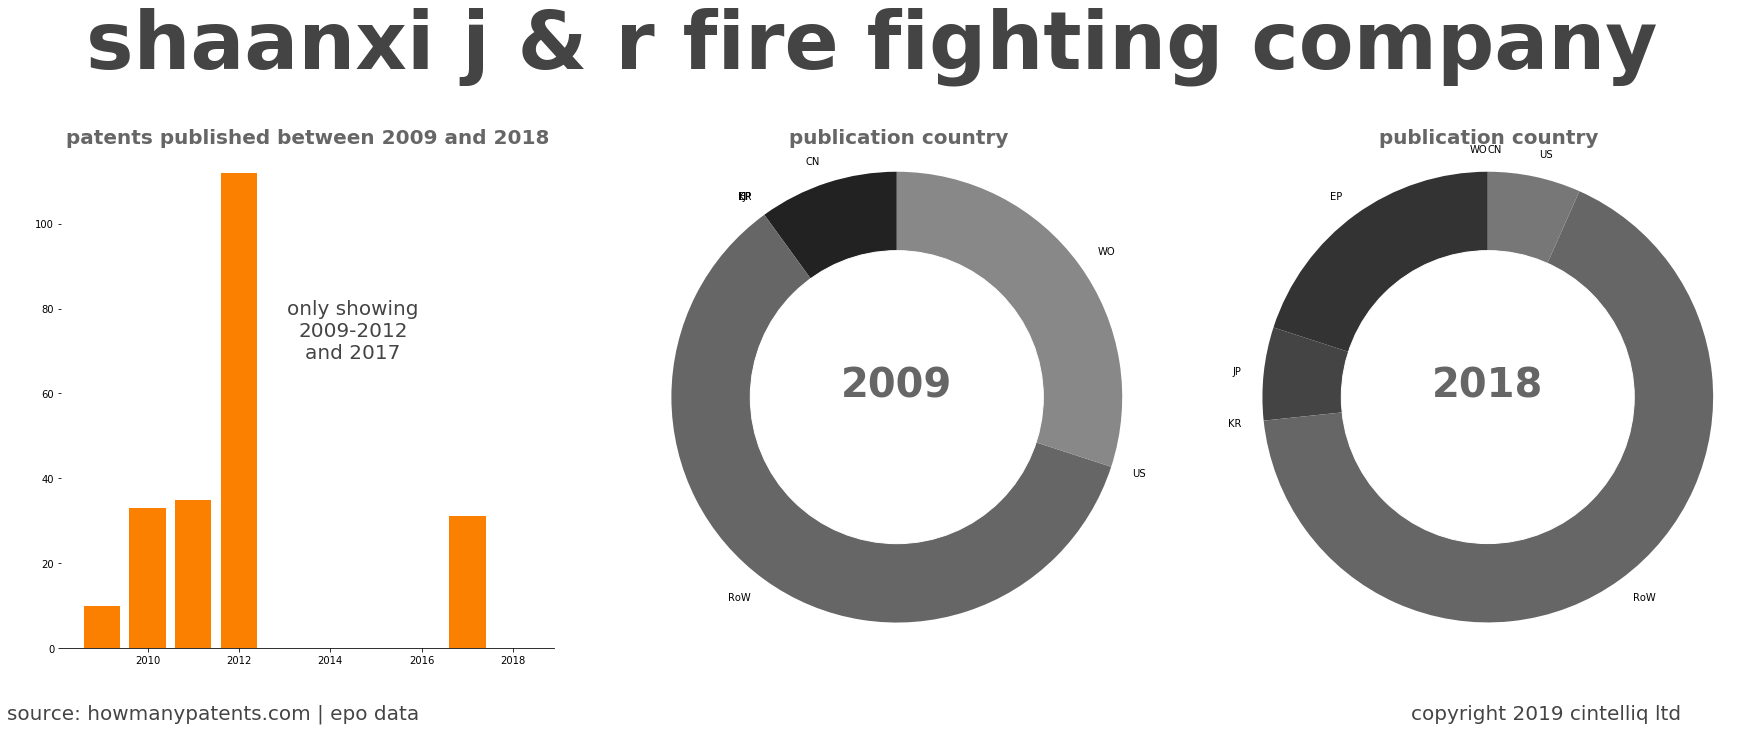 summary of patents for Shaanxi J & R Fire Fighting Company